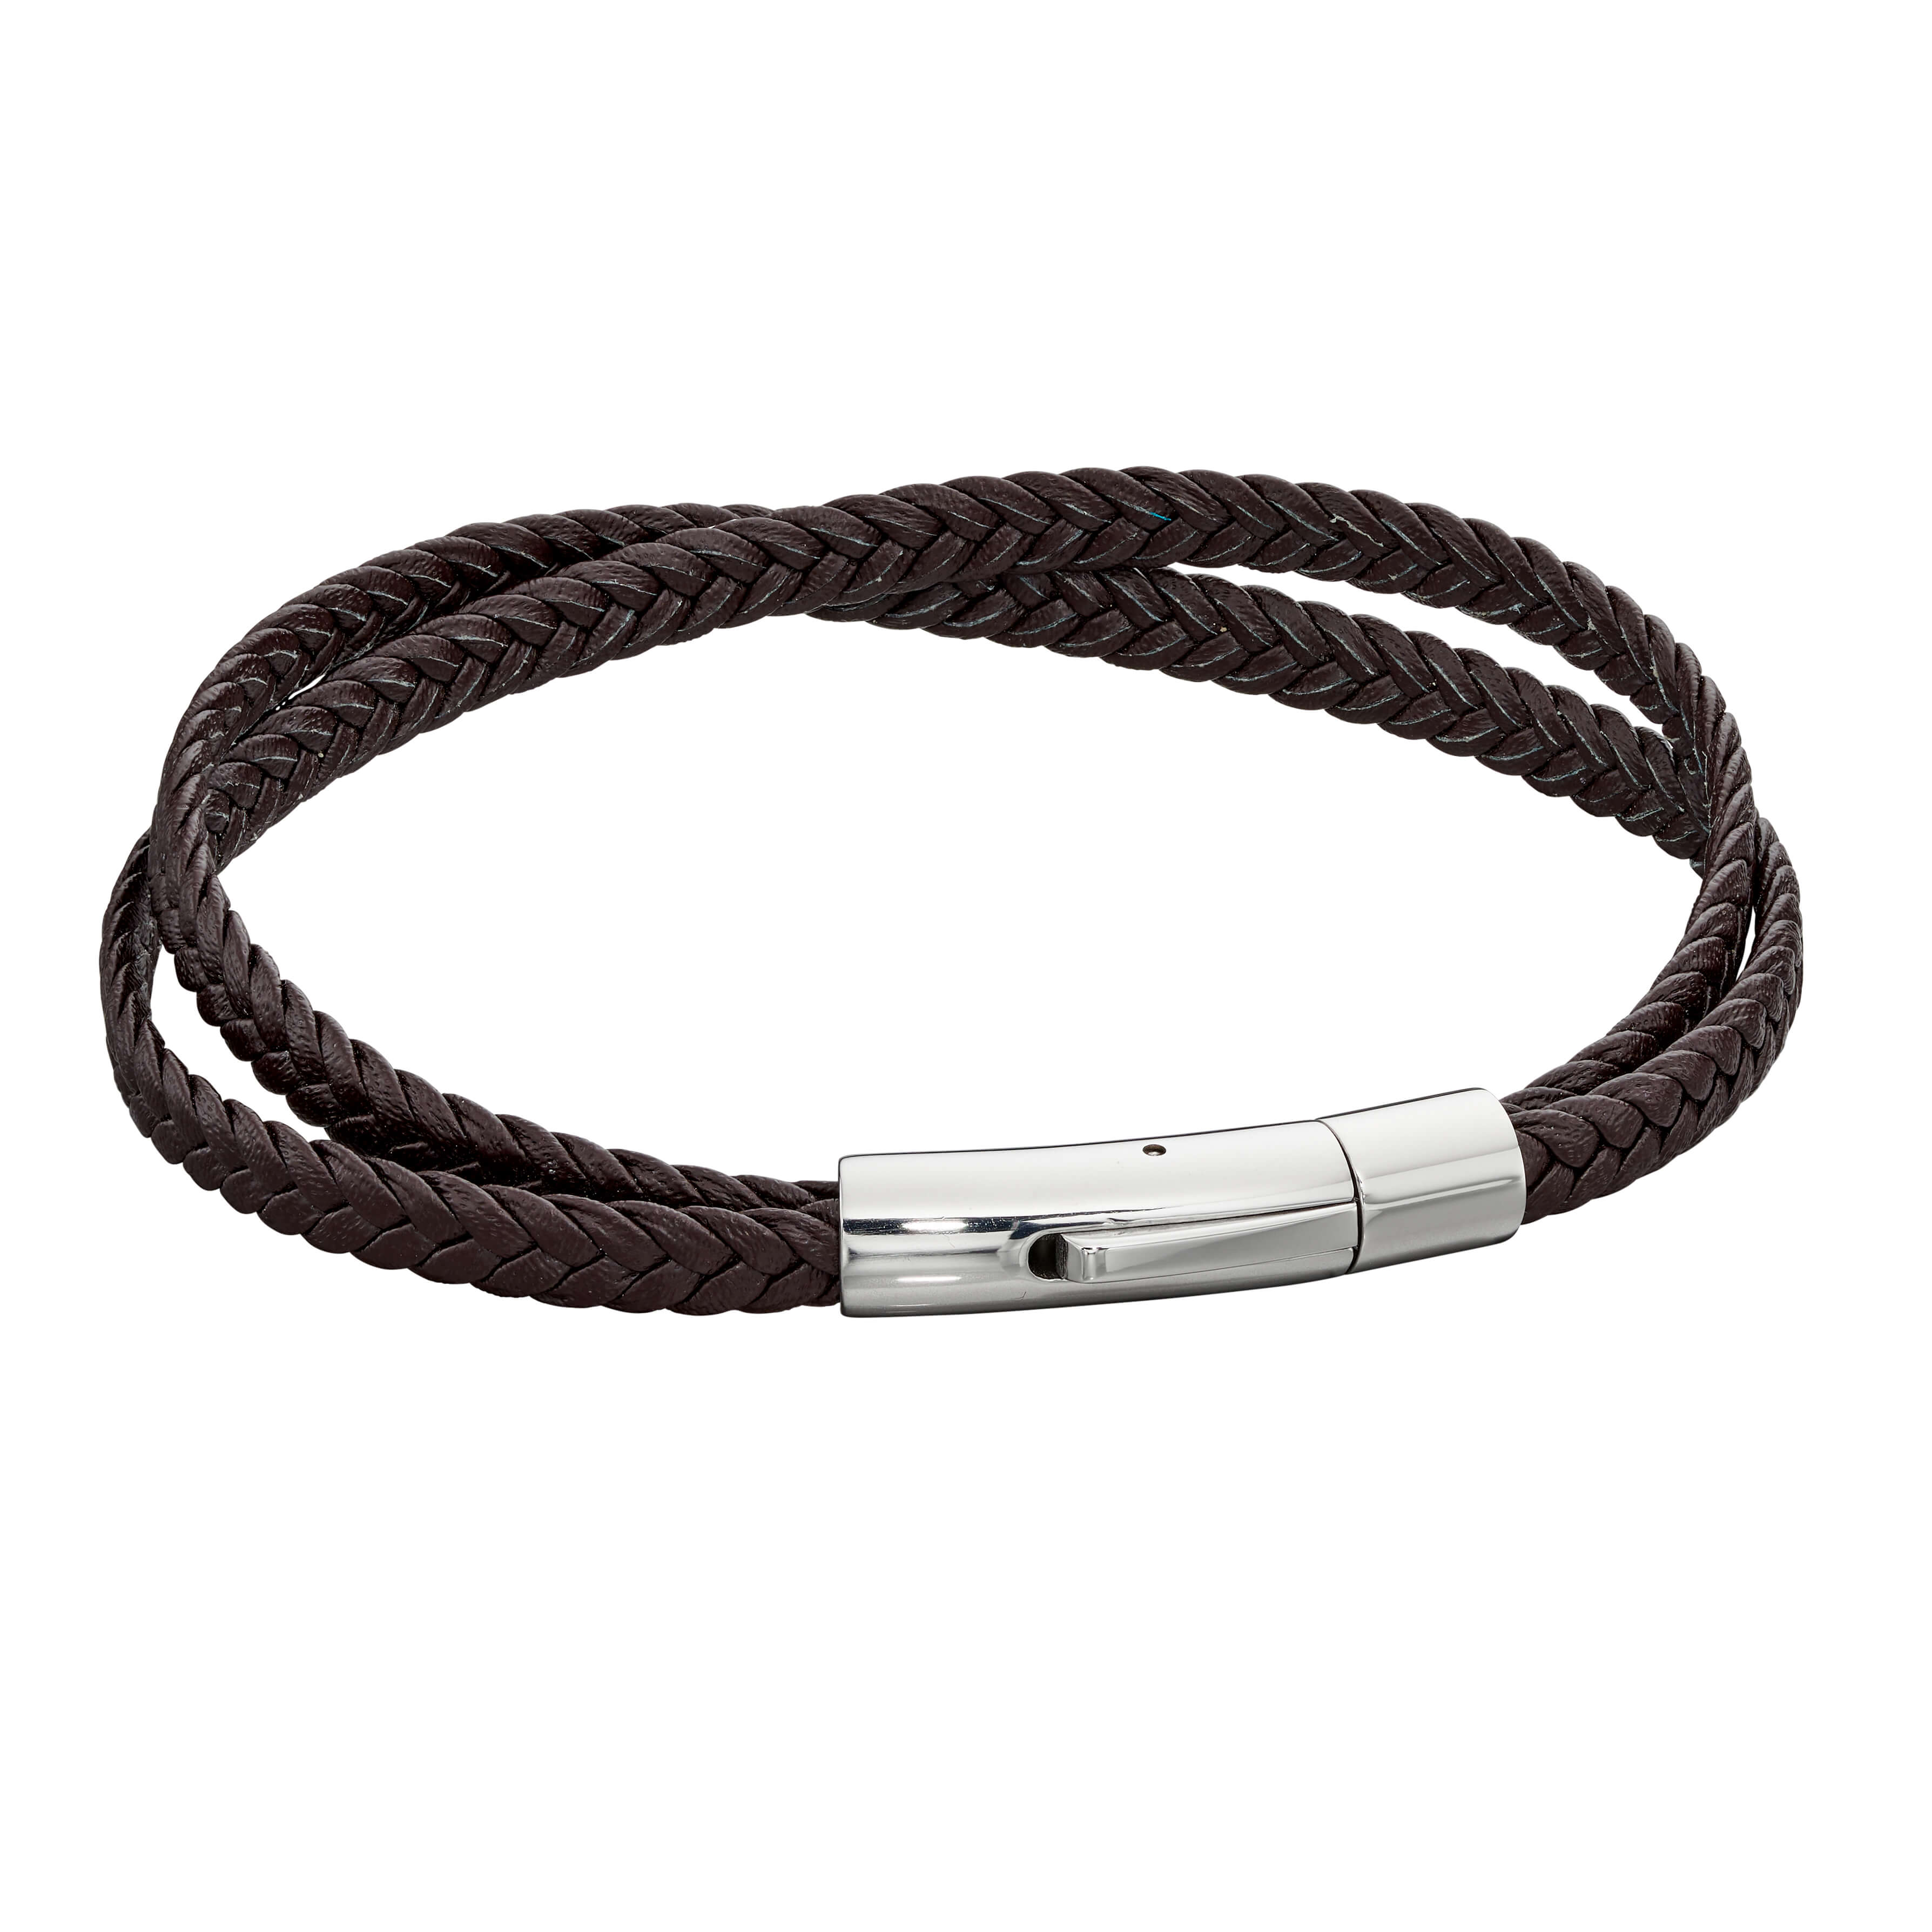 Stainless Steel & Black Plaited Leather Crossover Bracelet - FB0012 - Hallmark Jewellers Formby & The Jewellers Bench Widnes